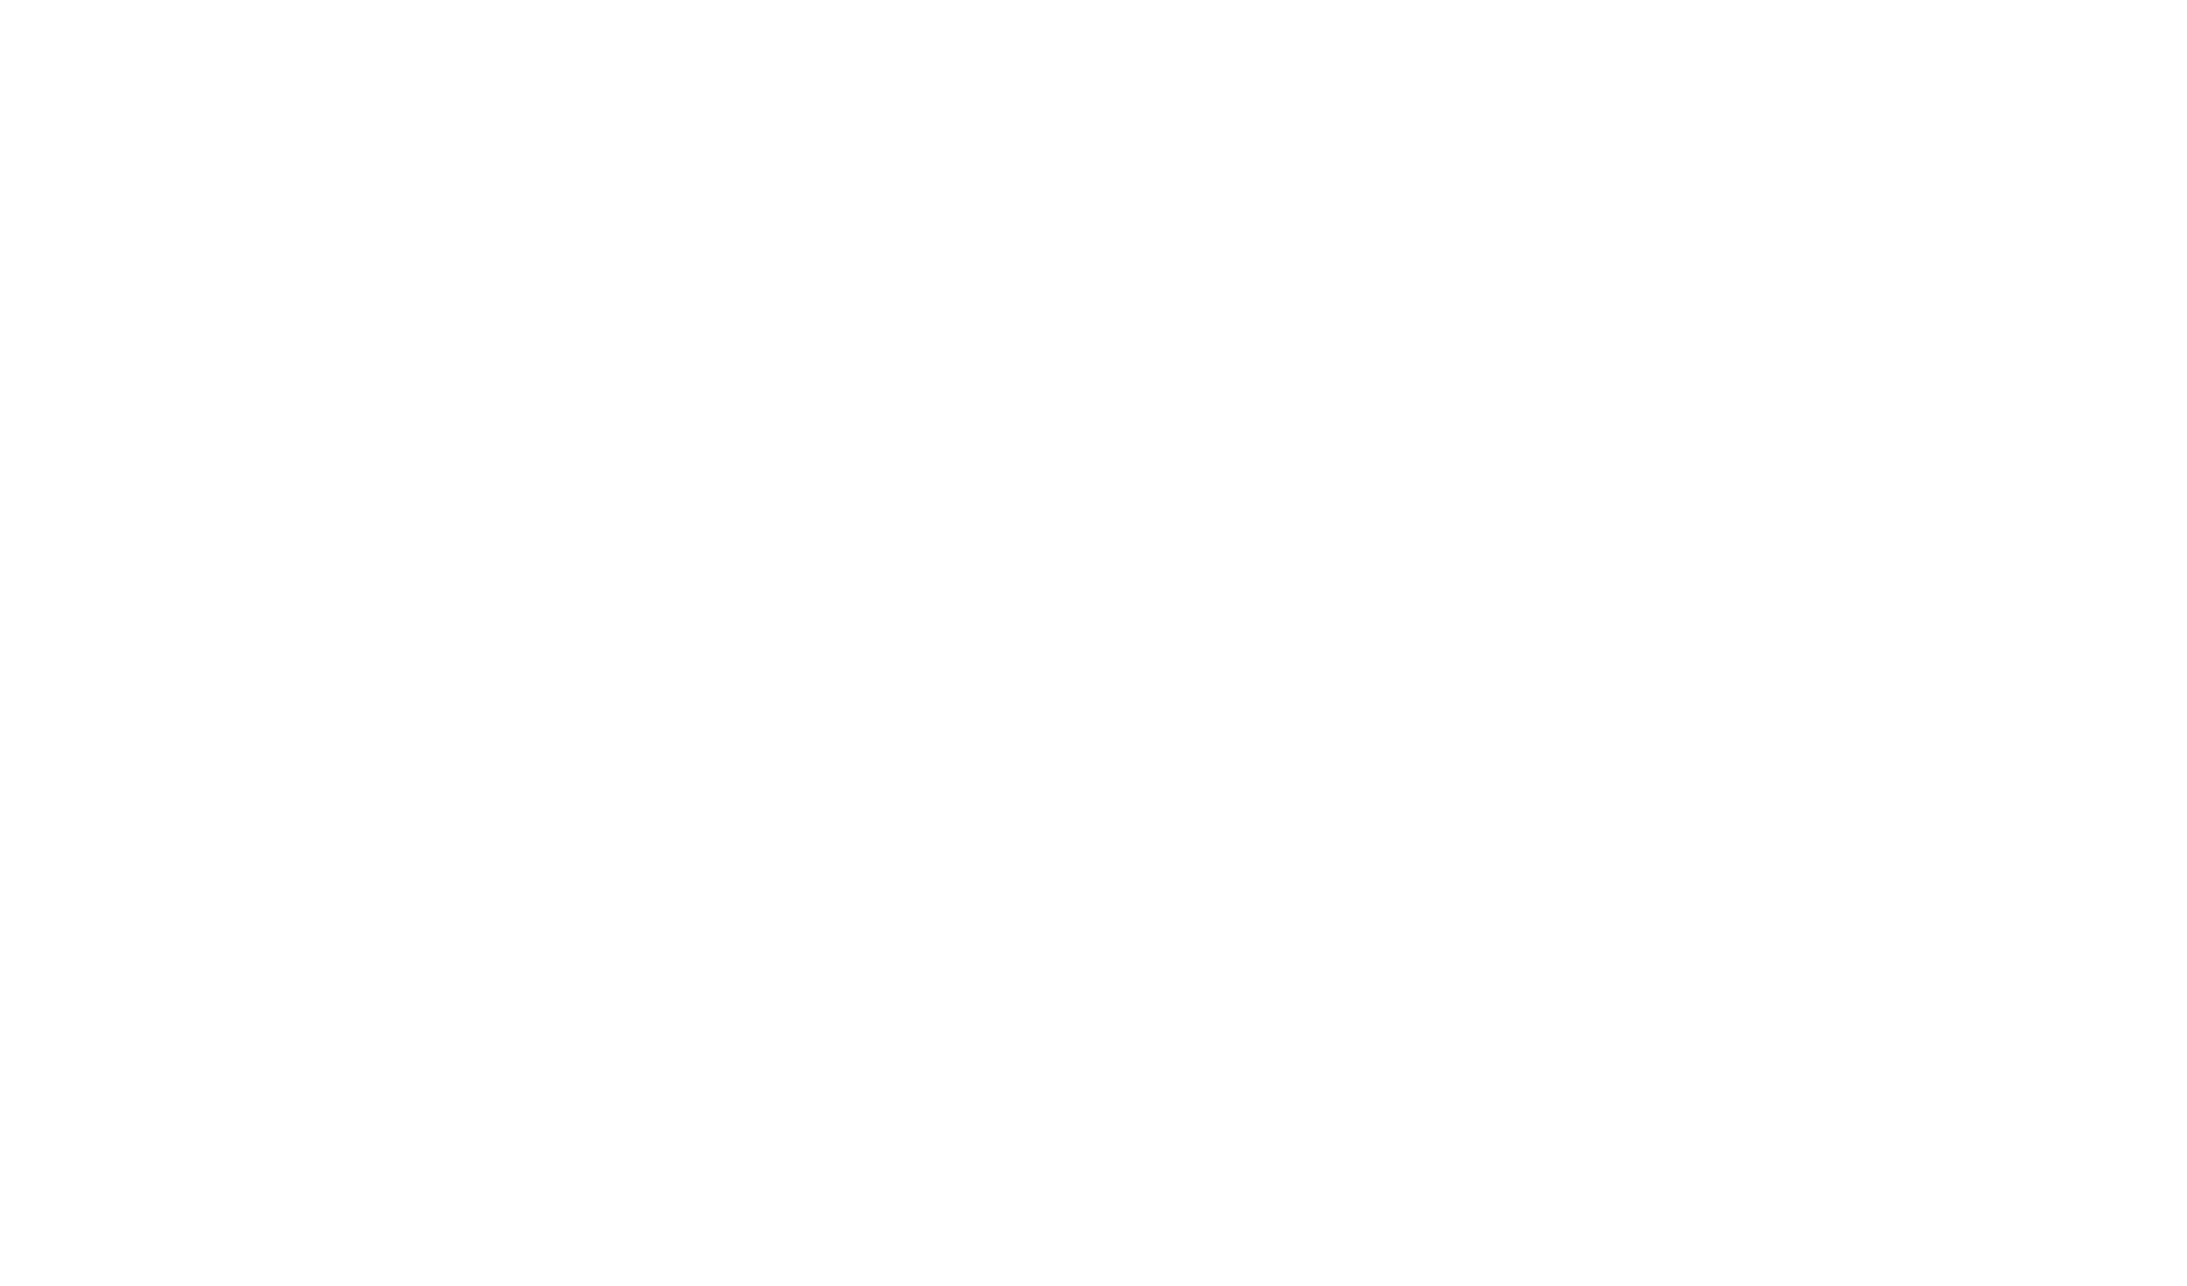 The Sparks Brothers logo